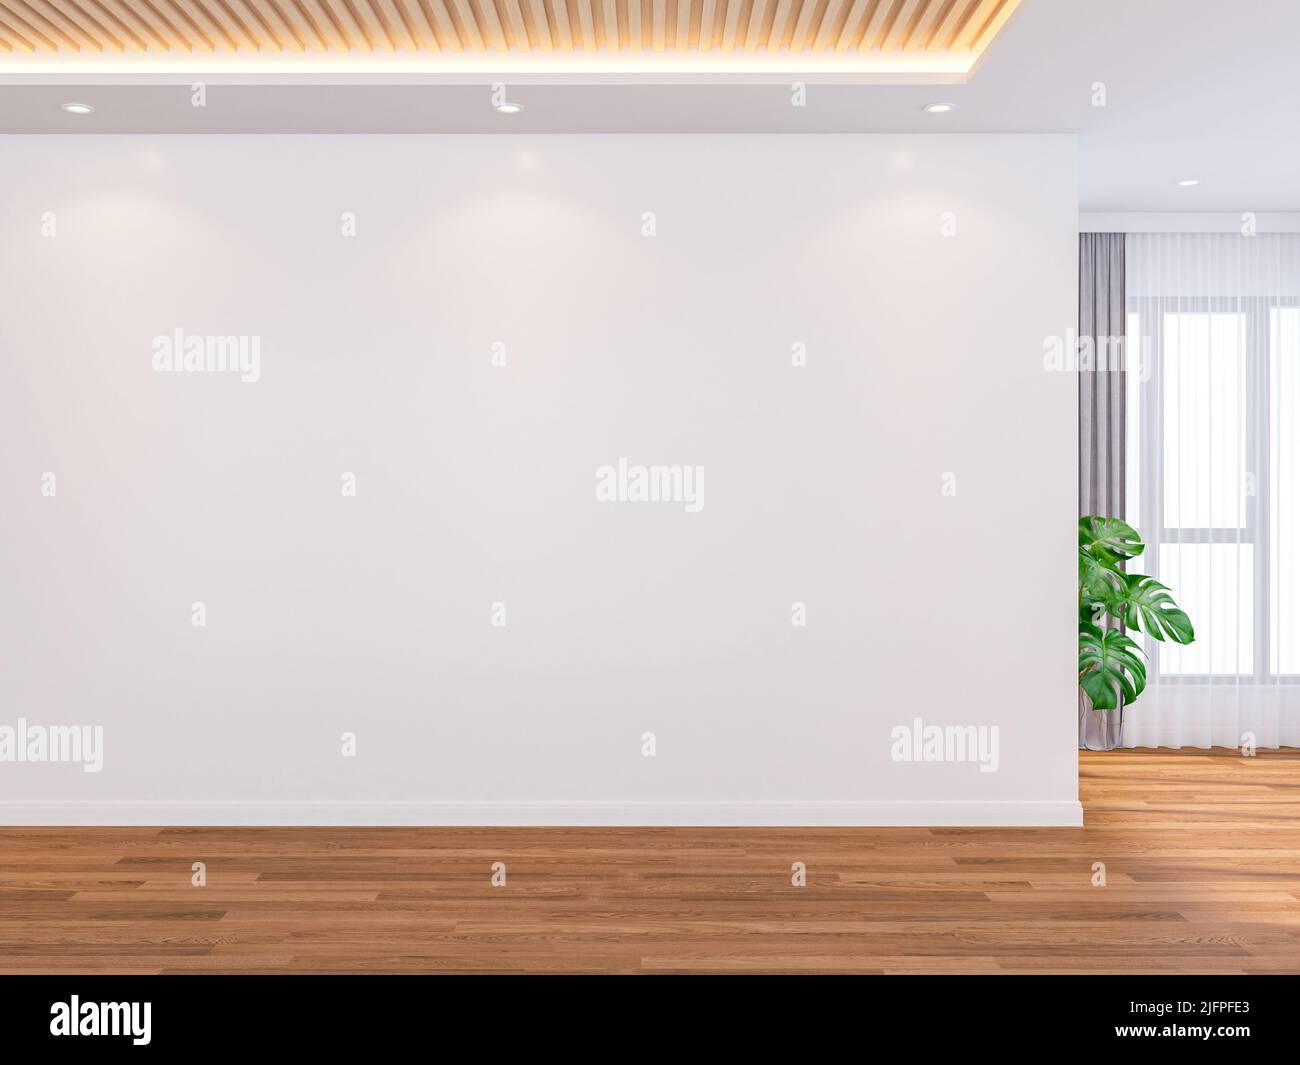 Blank wall mockupMinimal room wall mockup with wooden floor and ornamental plant contemporary,3D rendering Stock Photo